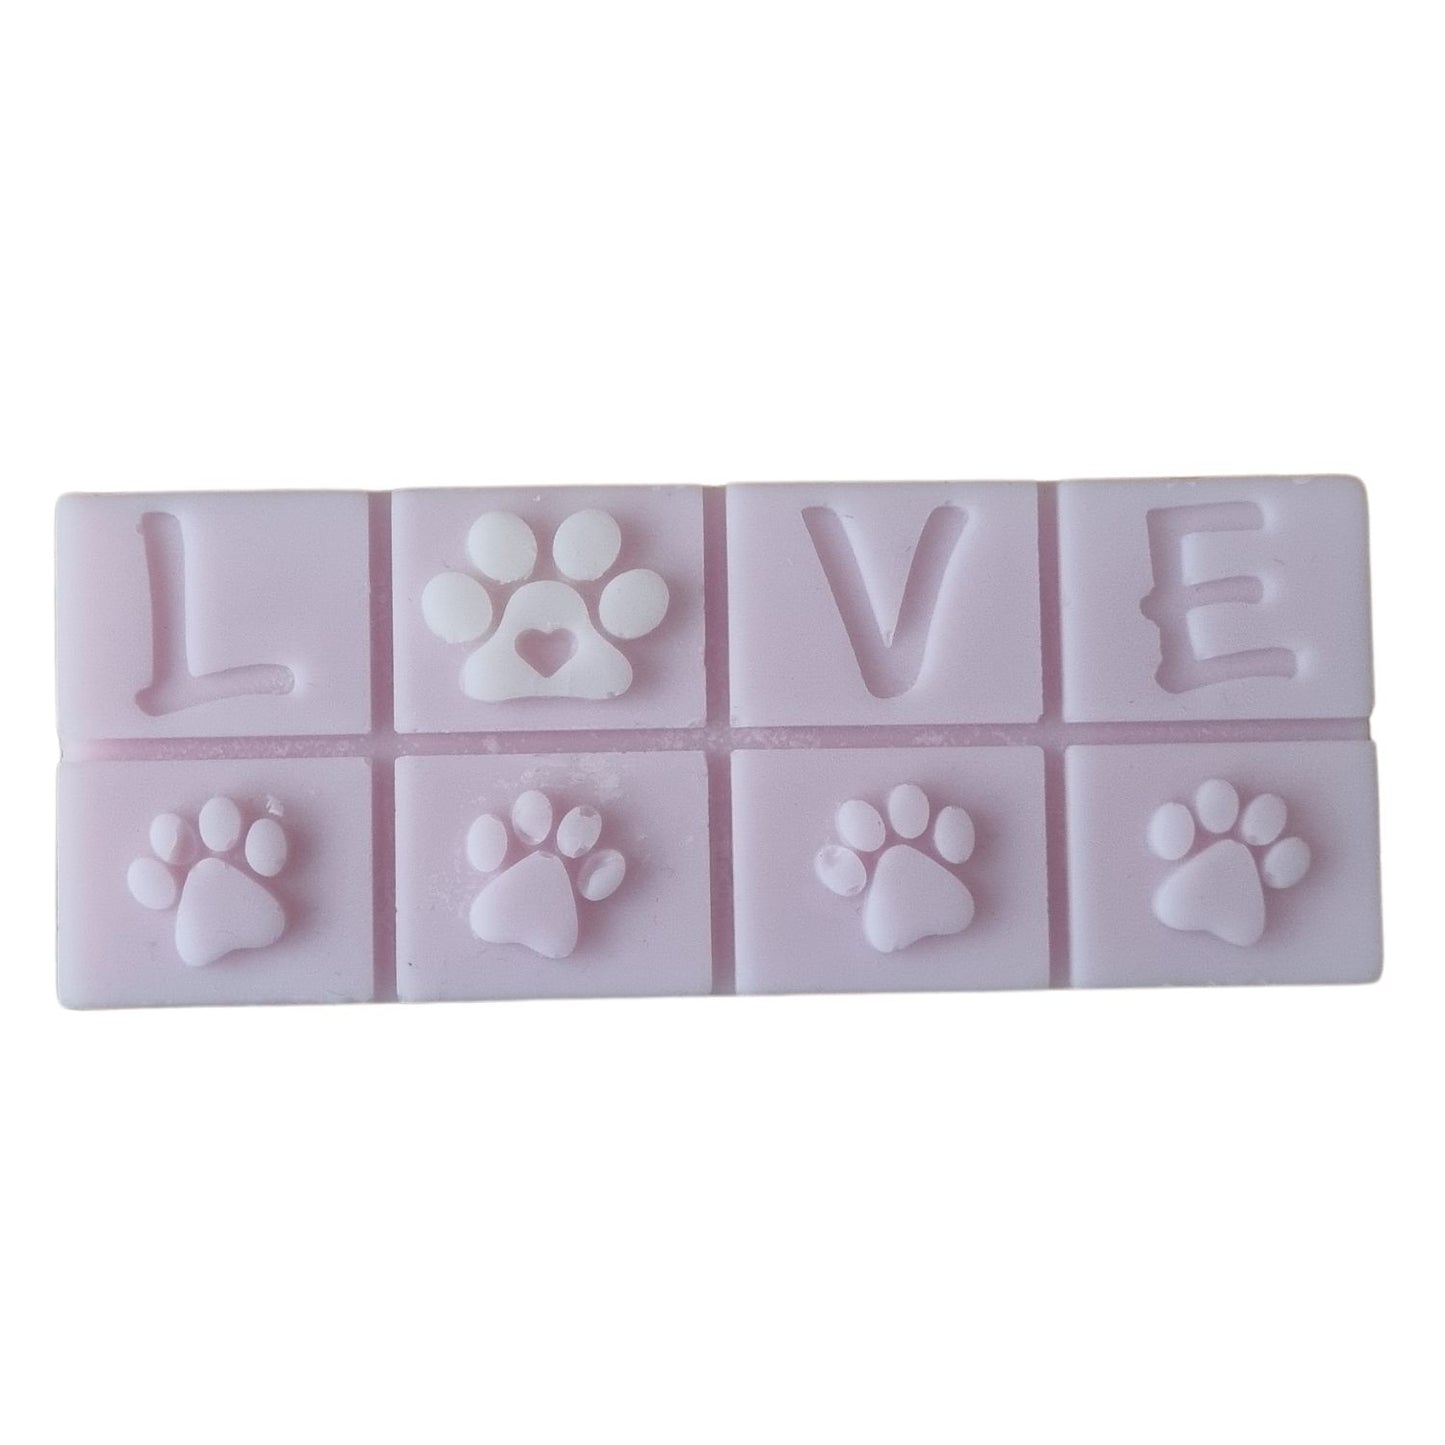 A lilac colored wax melt bar with love and paws design